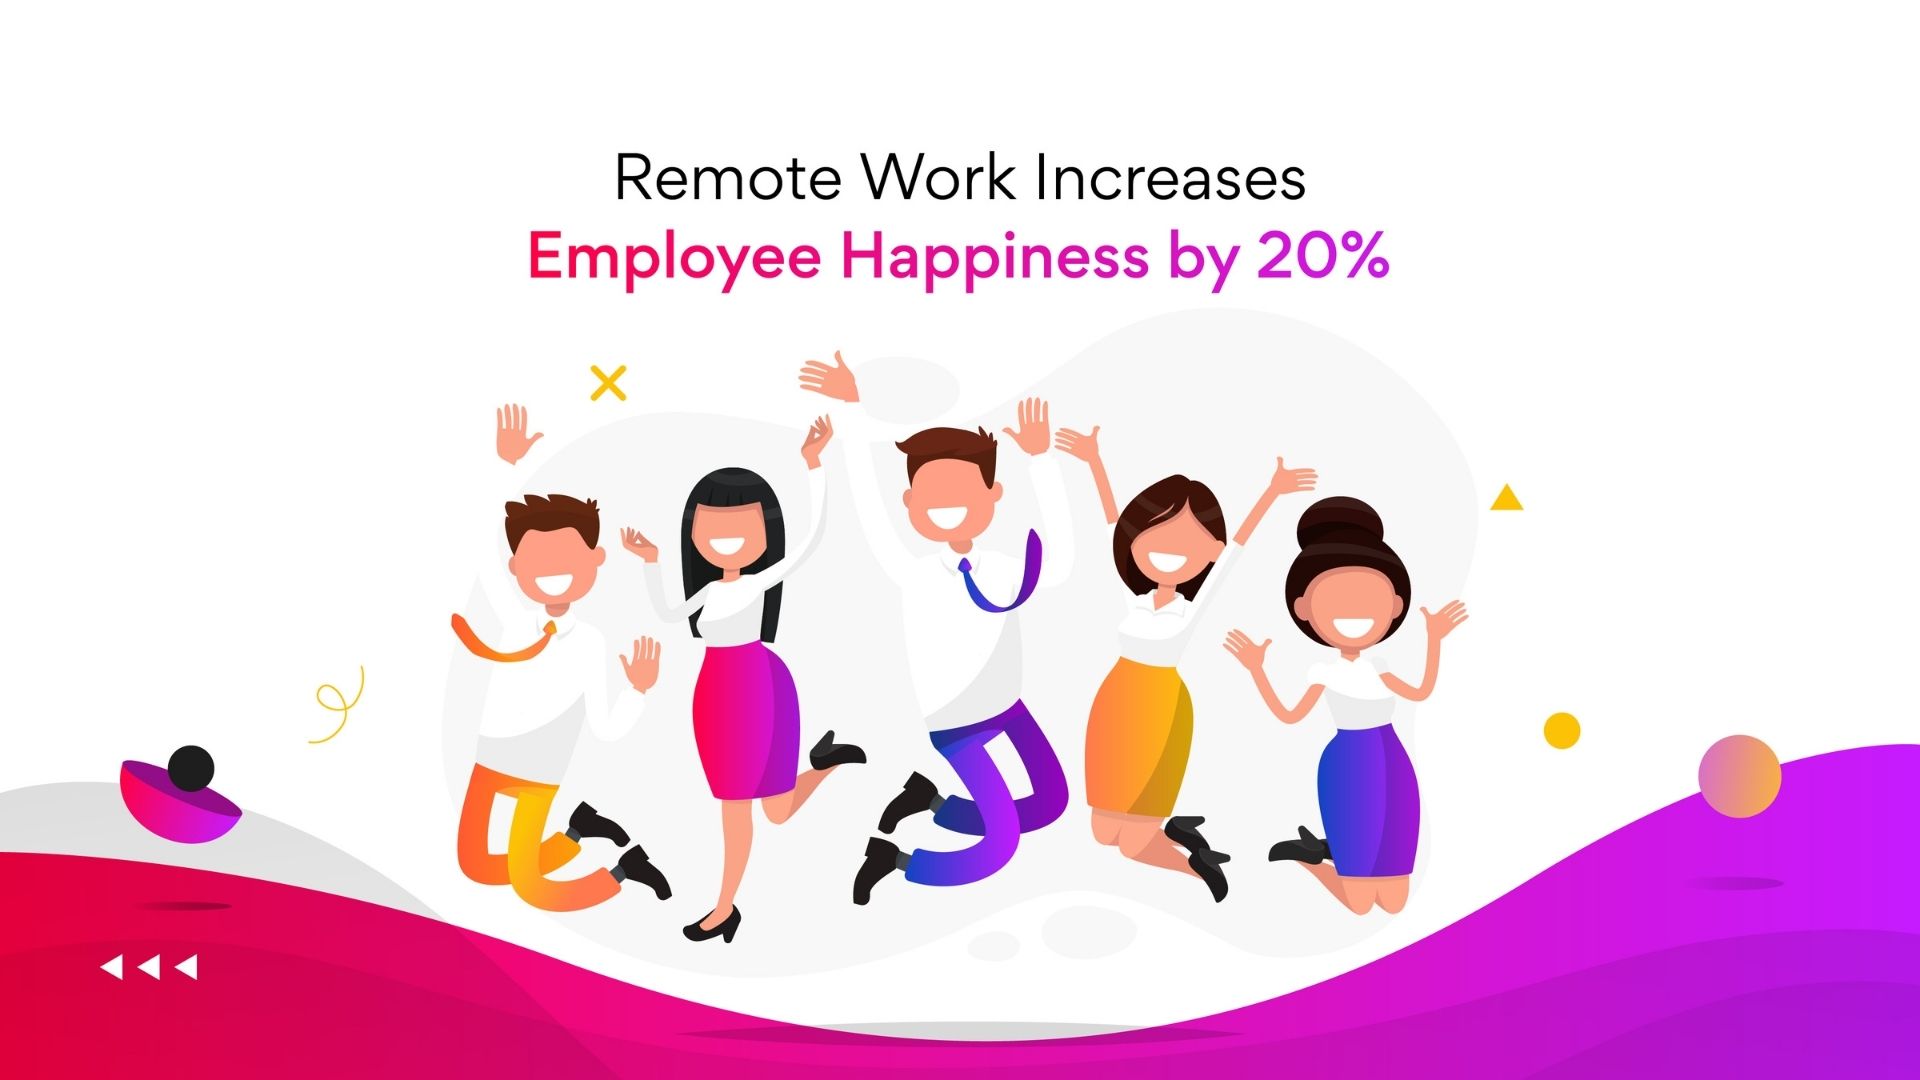 Remote Work Increases Employee Happiness by 20%